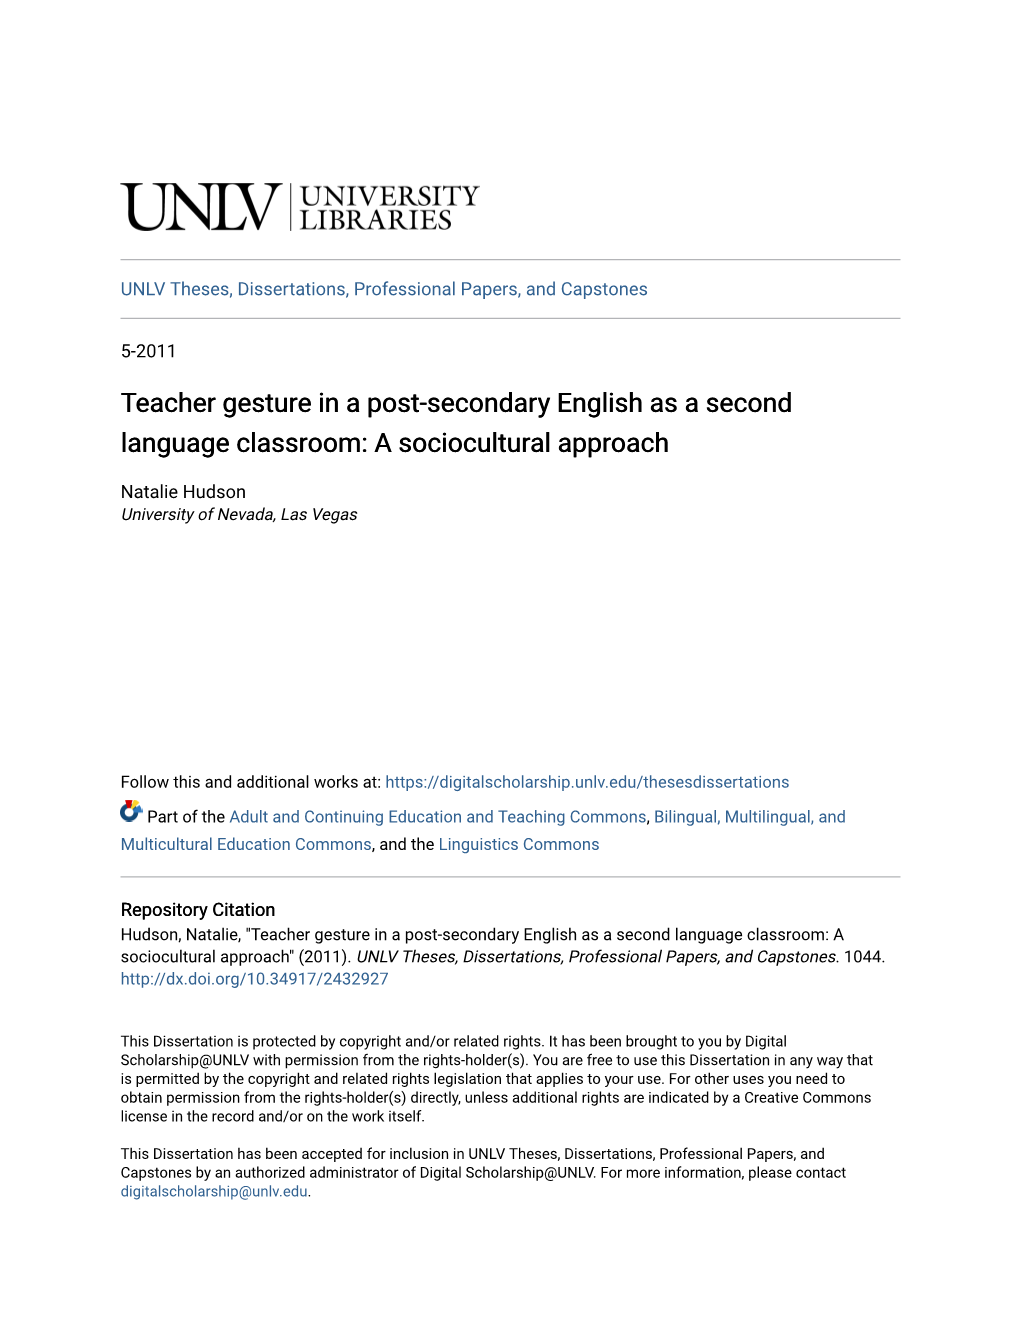 Teacher Gesture in a Post-Secondary English As a Second Language Classroom: a Sociocultural Approach